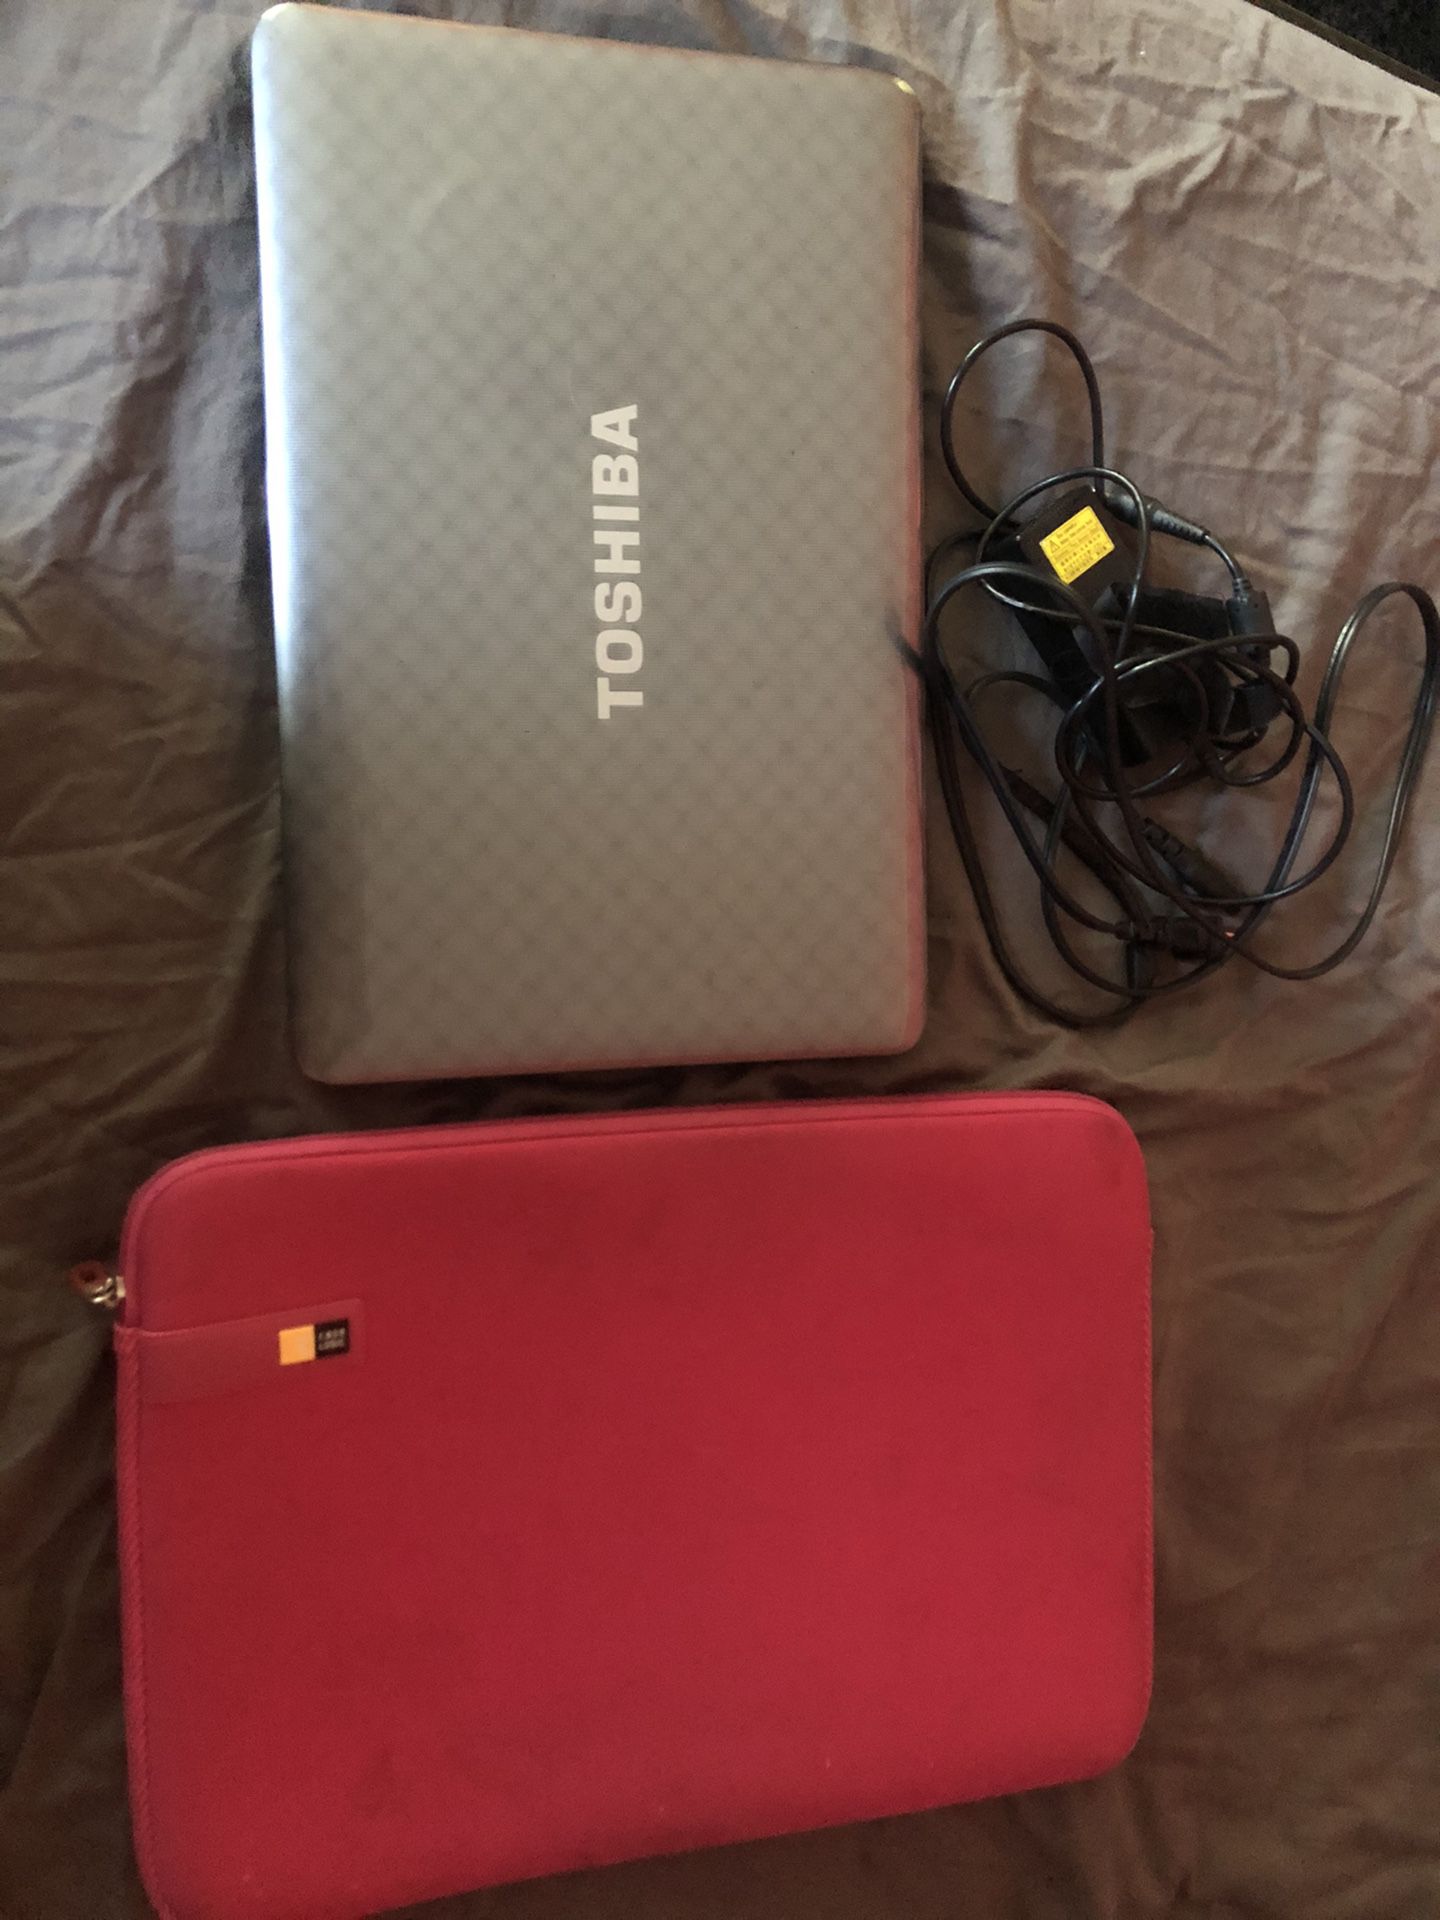 Toshiba 14” laptop with a case and charger, not used much because I got a new one.